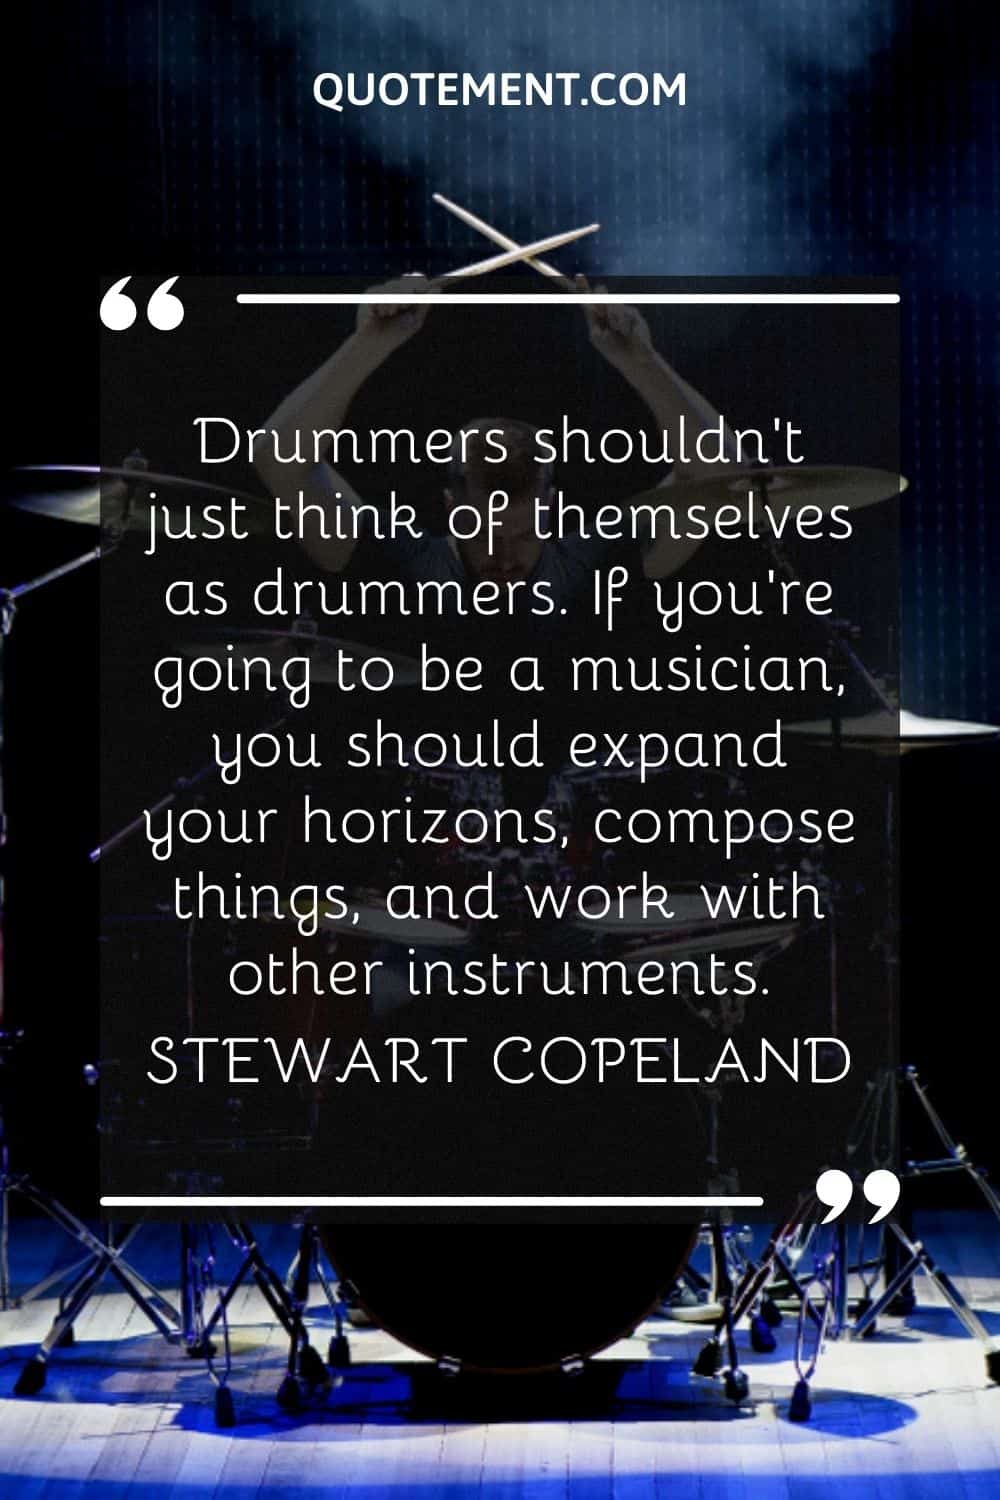 Drummers shouldn’t just think of themselves as drummers